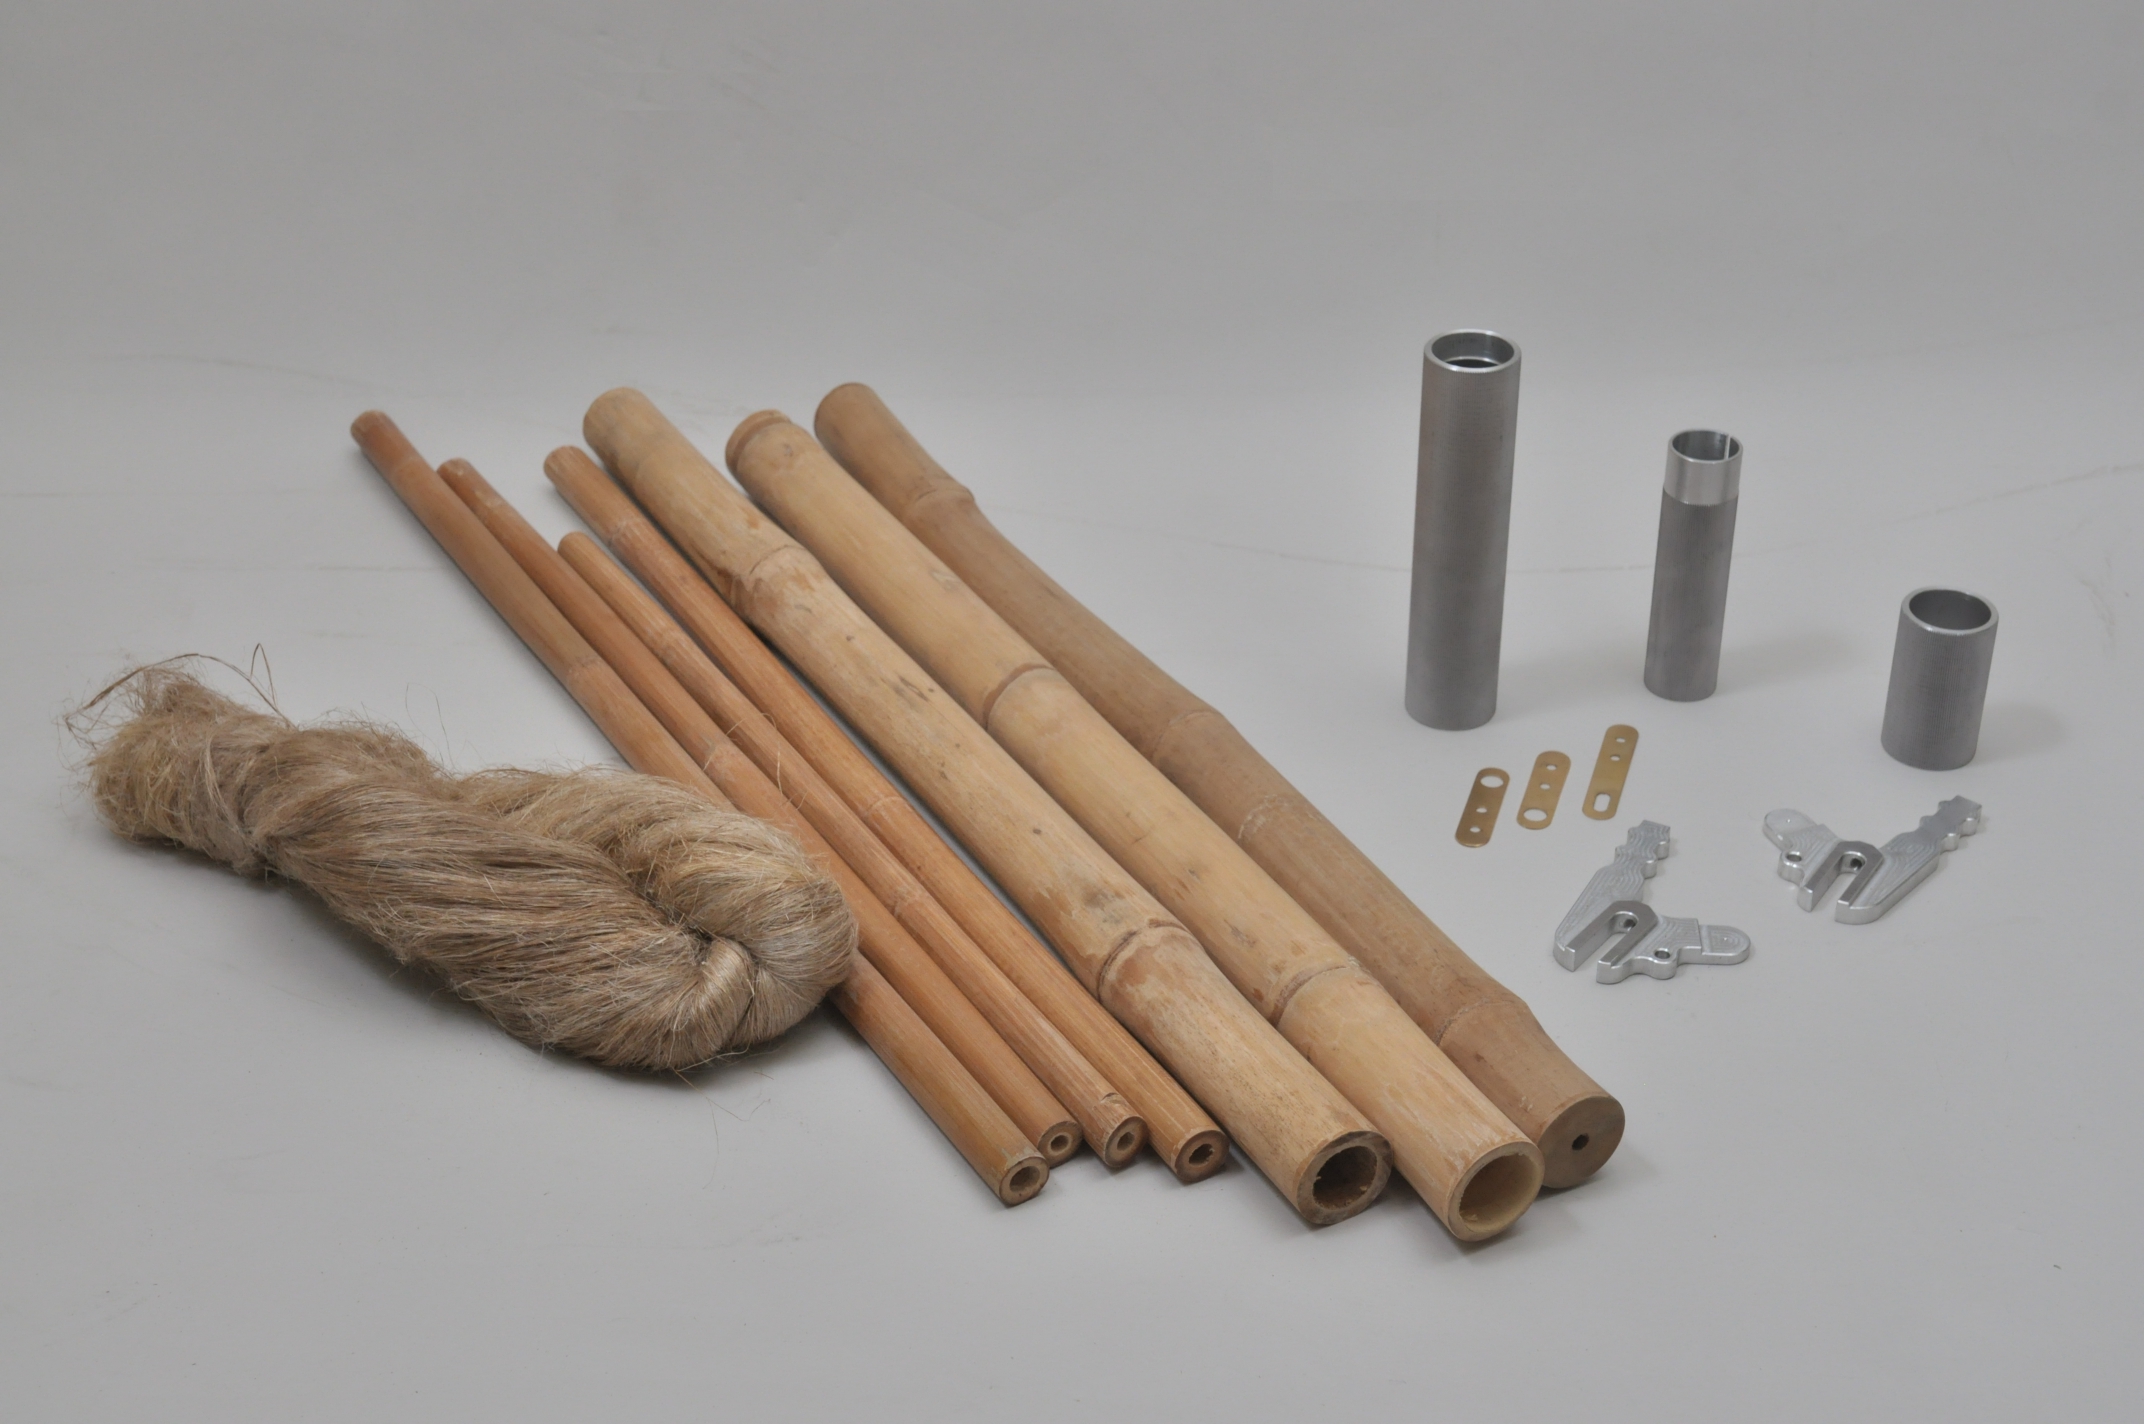 Raw materials to craft a bamboo frame